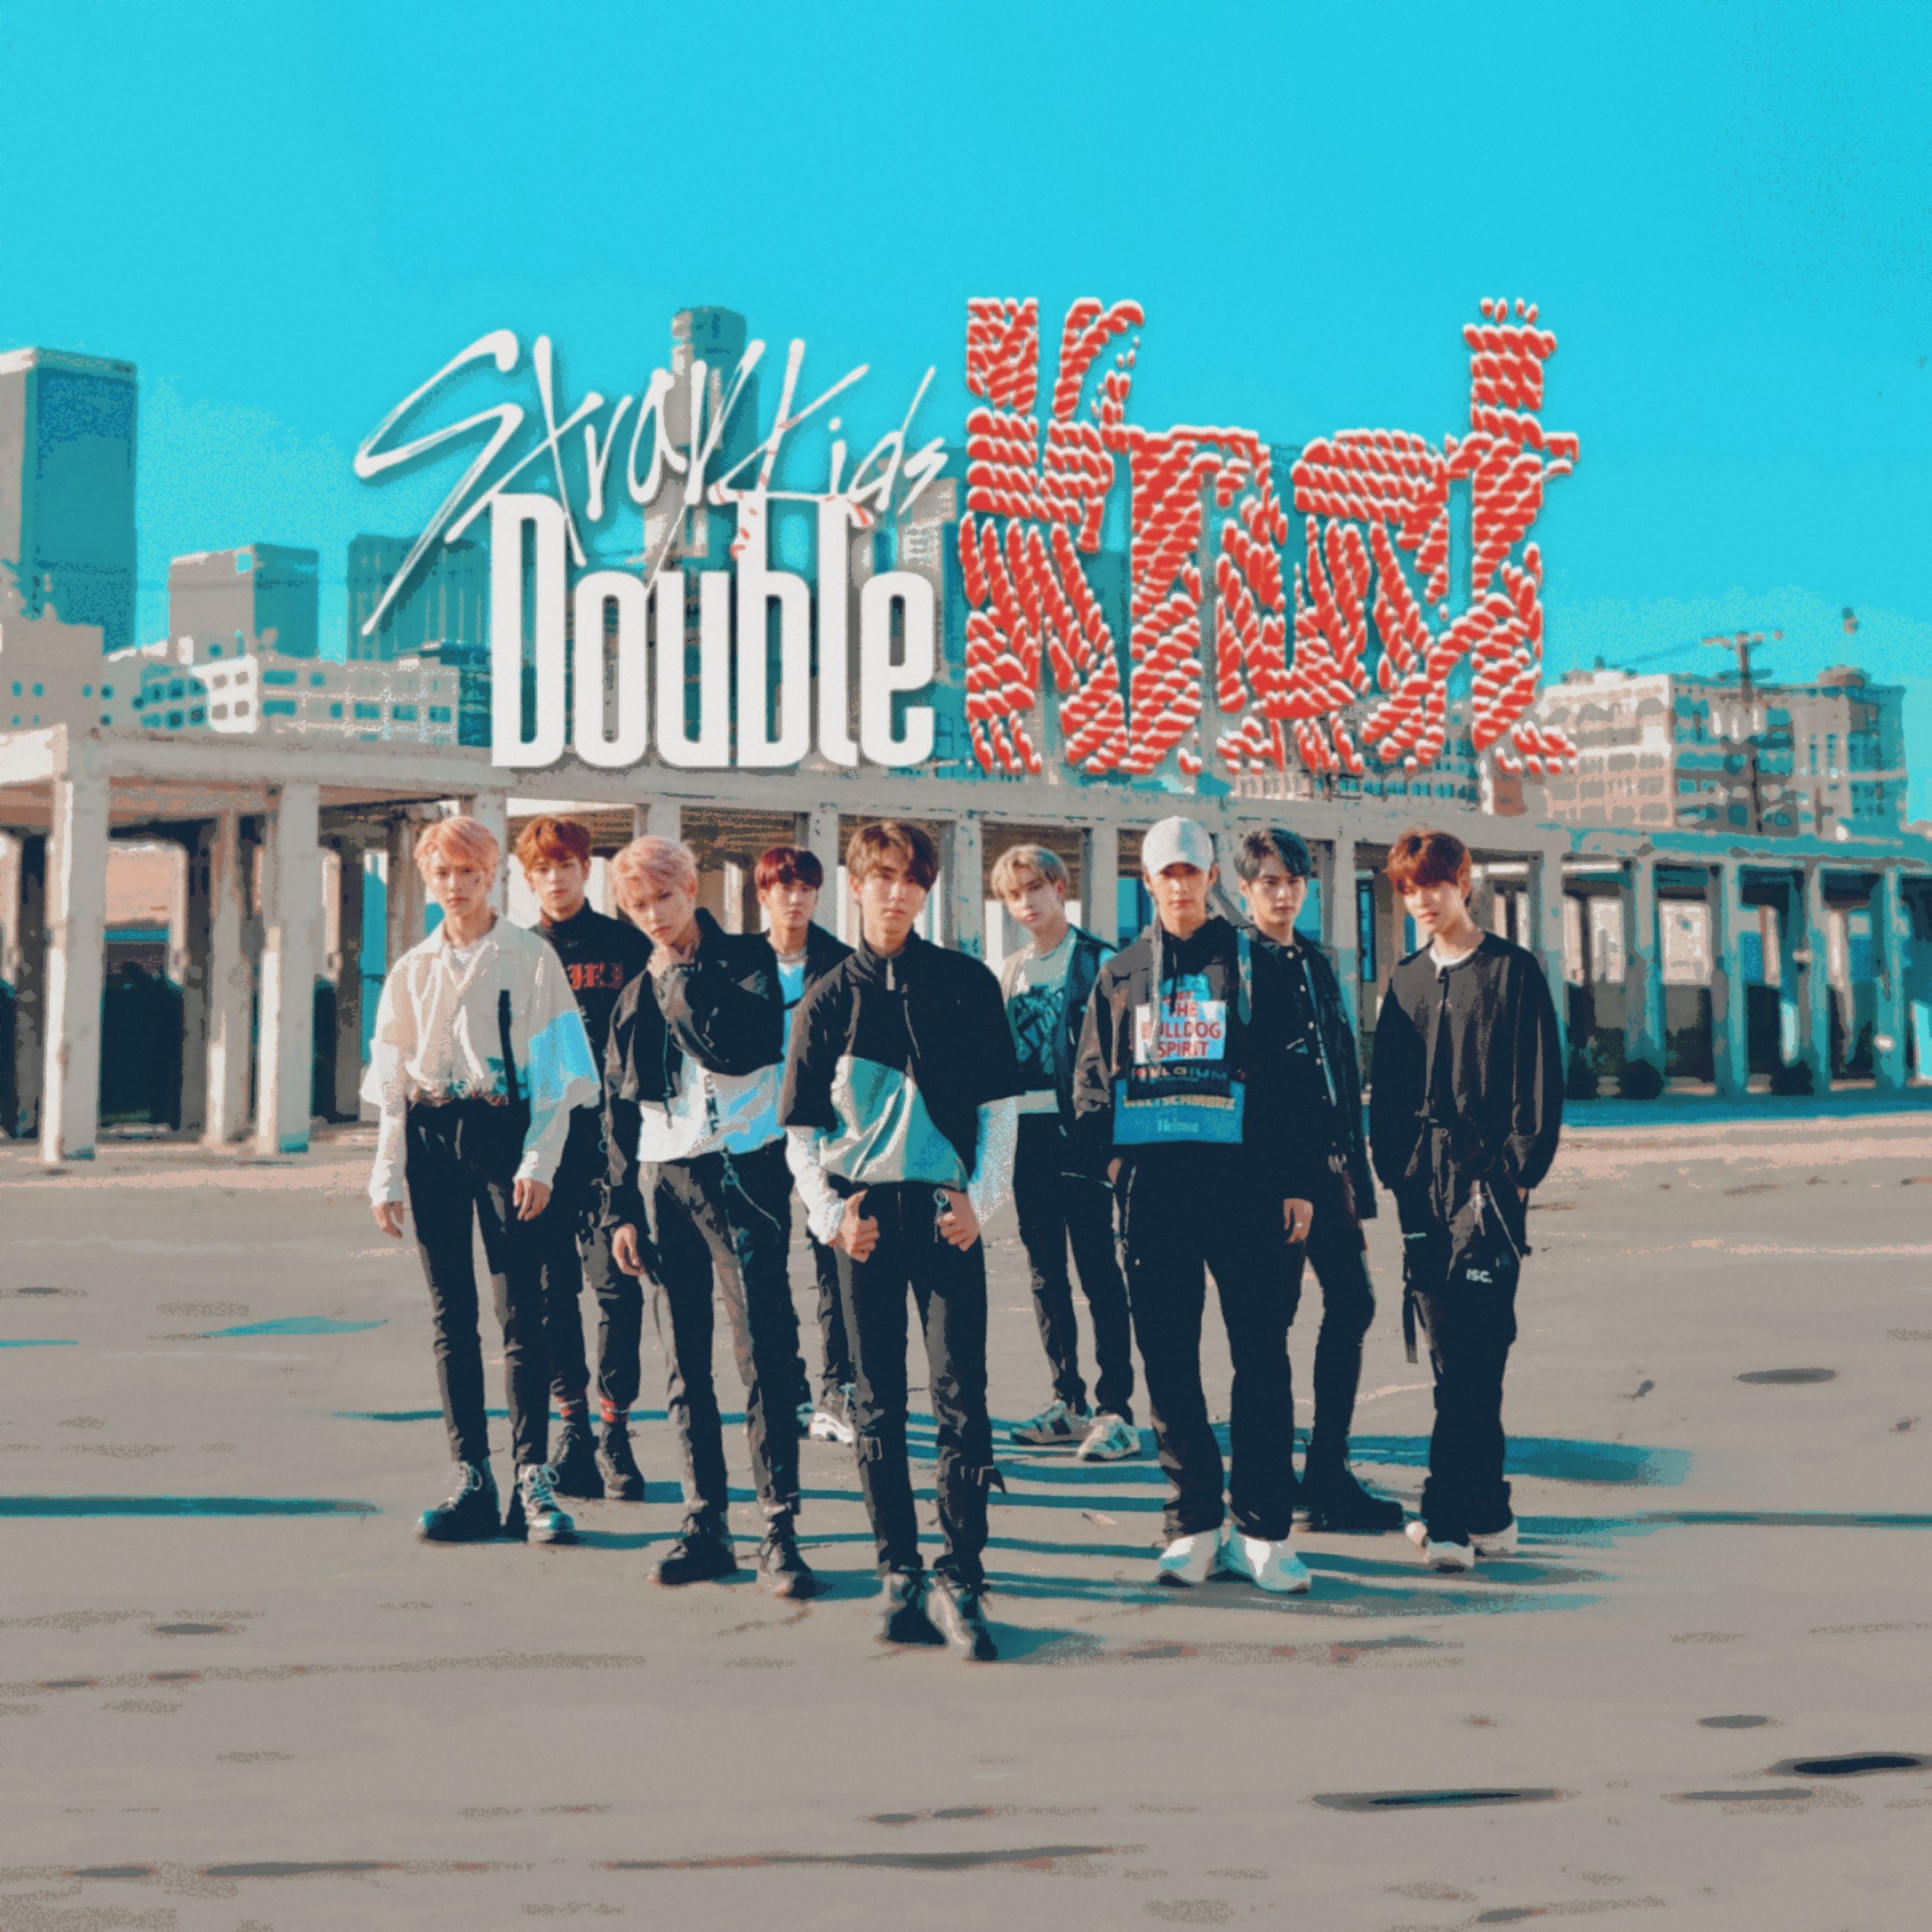 STRAY KIDS DOUBLE KNOT album cover by LEAlbum on DeviantArt